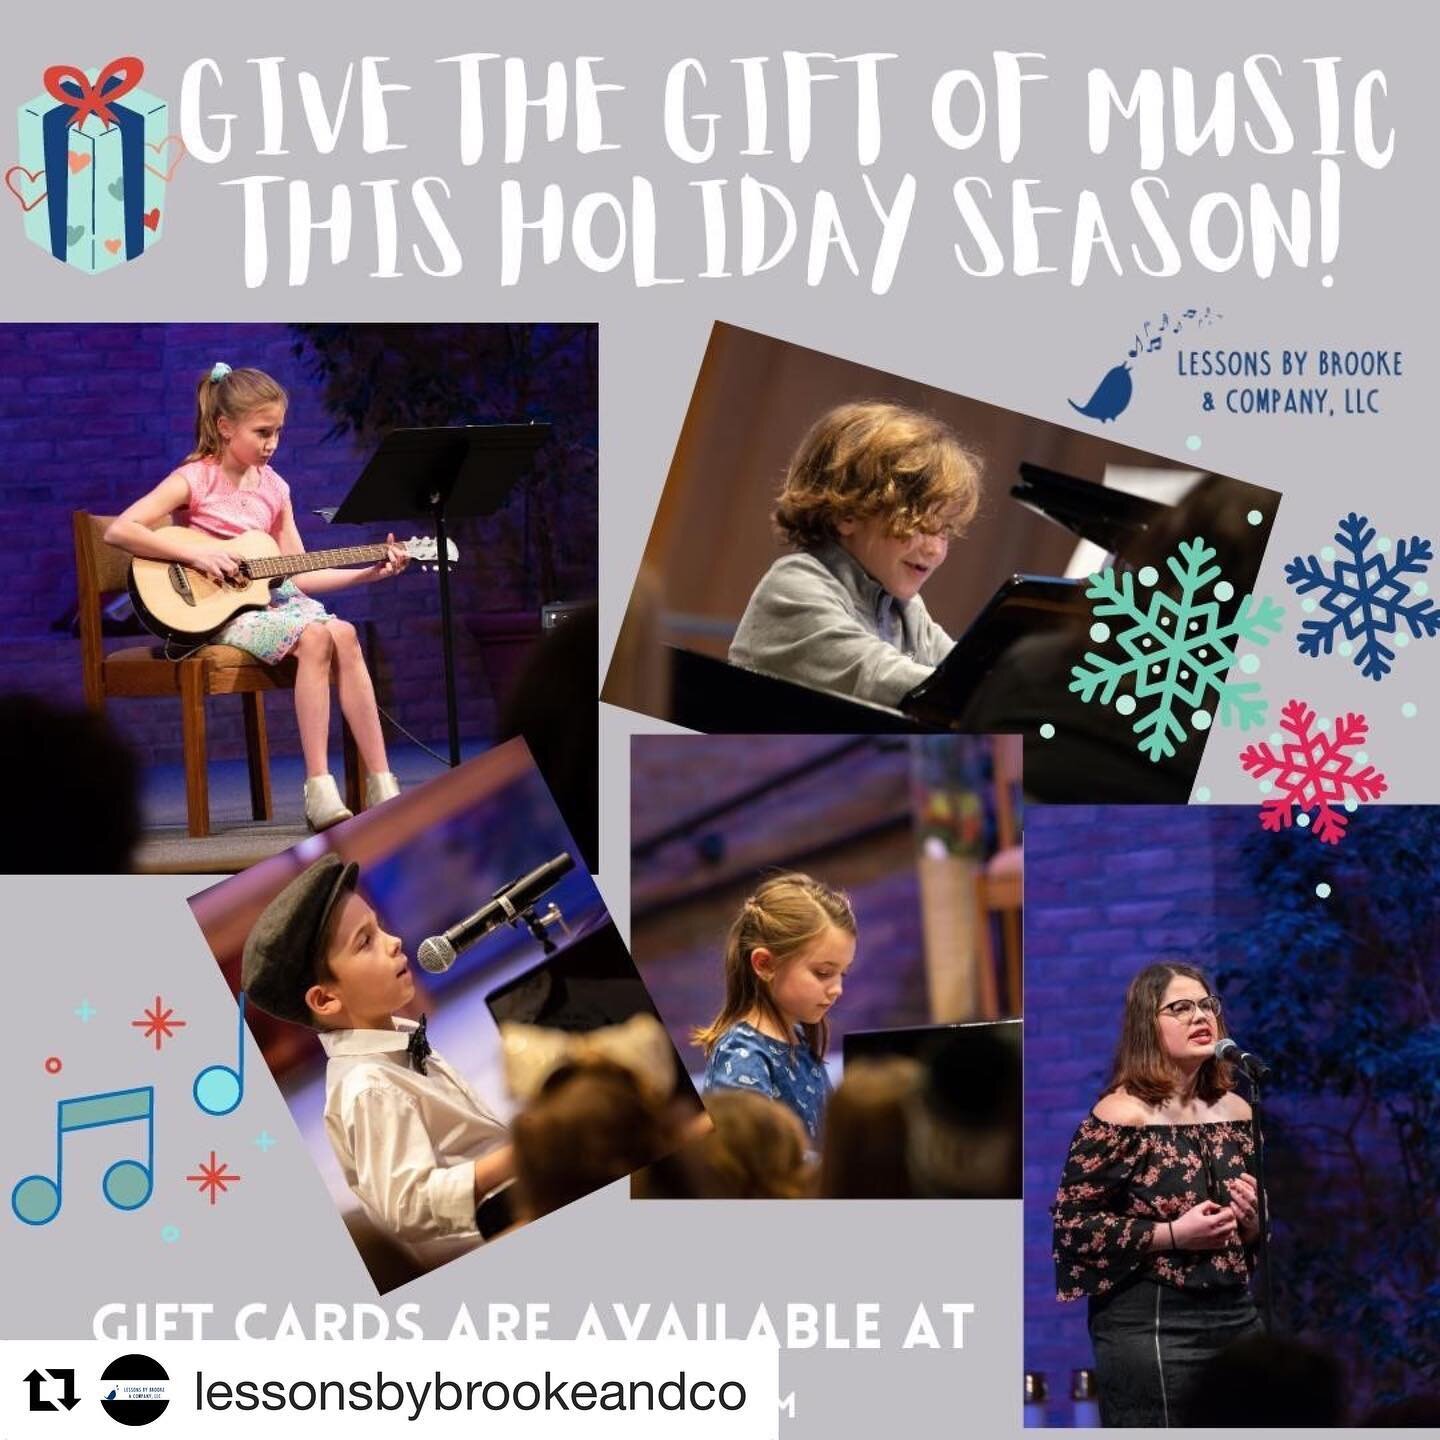 🎶❤️☃️

#Repost @lessonsbybrookeandco with @get_repost
・・・
🎁 Looking for a unique gift to give for this unique holiday season?! Consider giving the gift of music! 🎶⁠
⁠
👨&zwj;🏫👩&zwj;🏫 We teach private music lessons to students of all interests, 